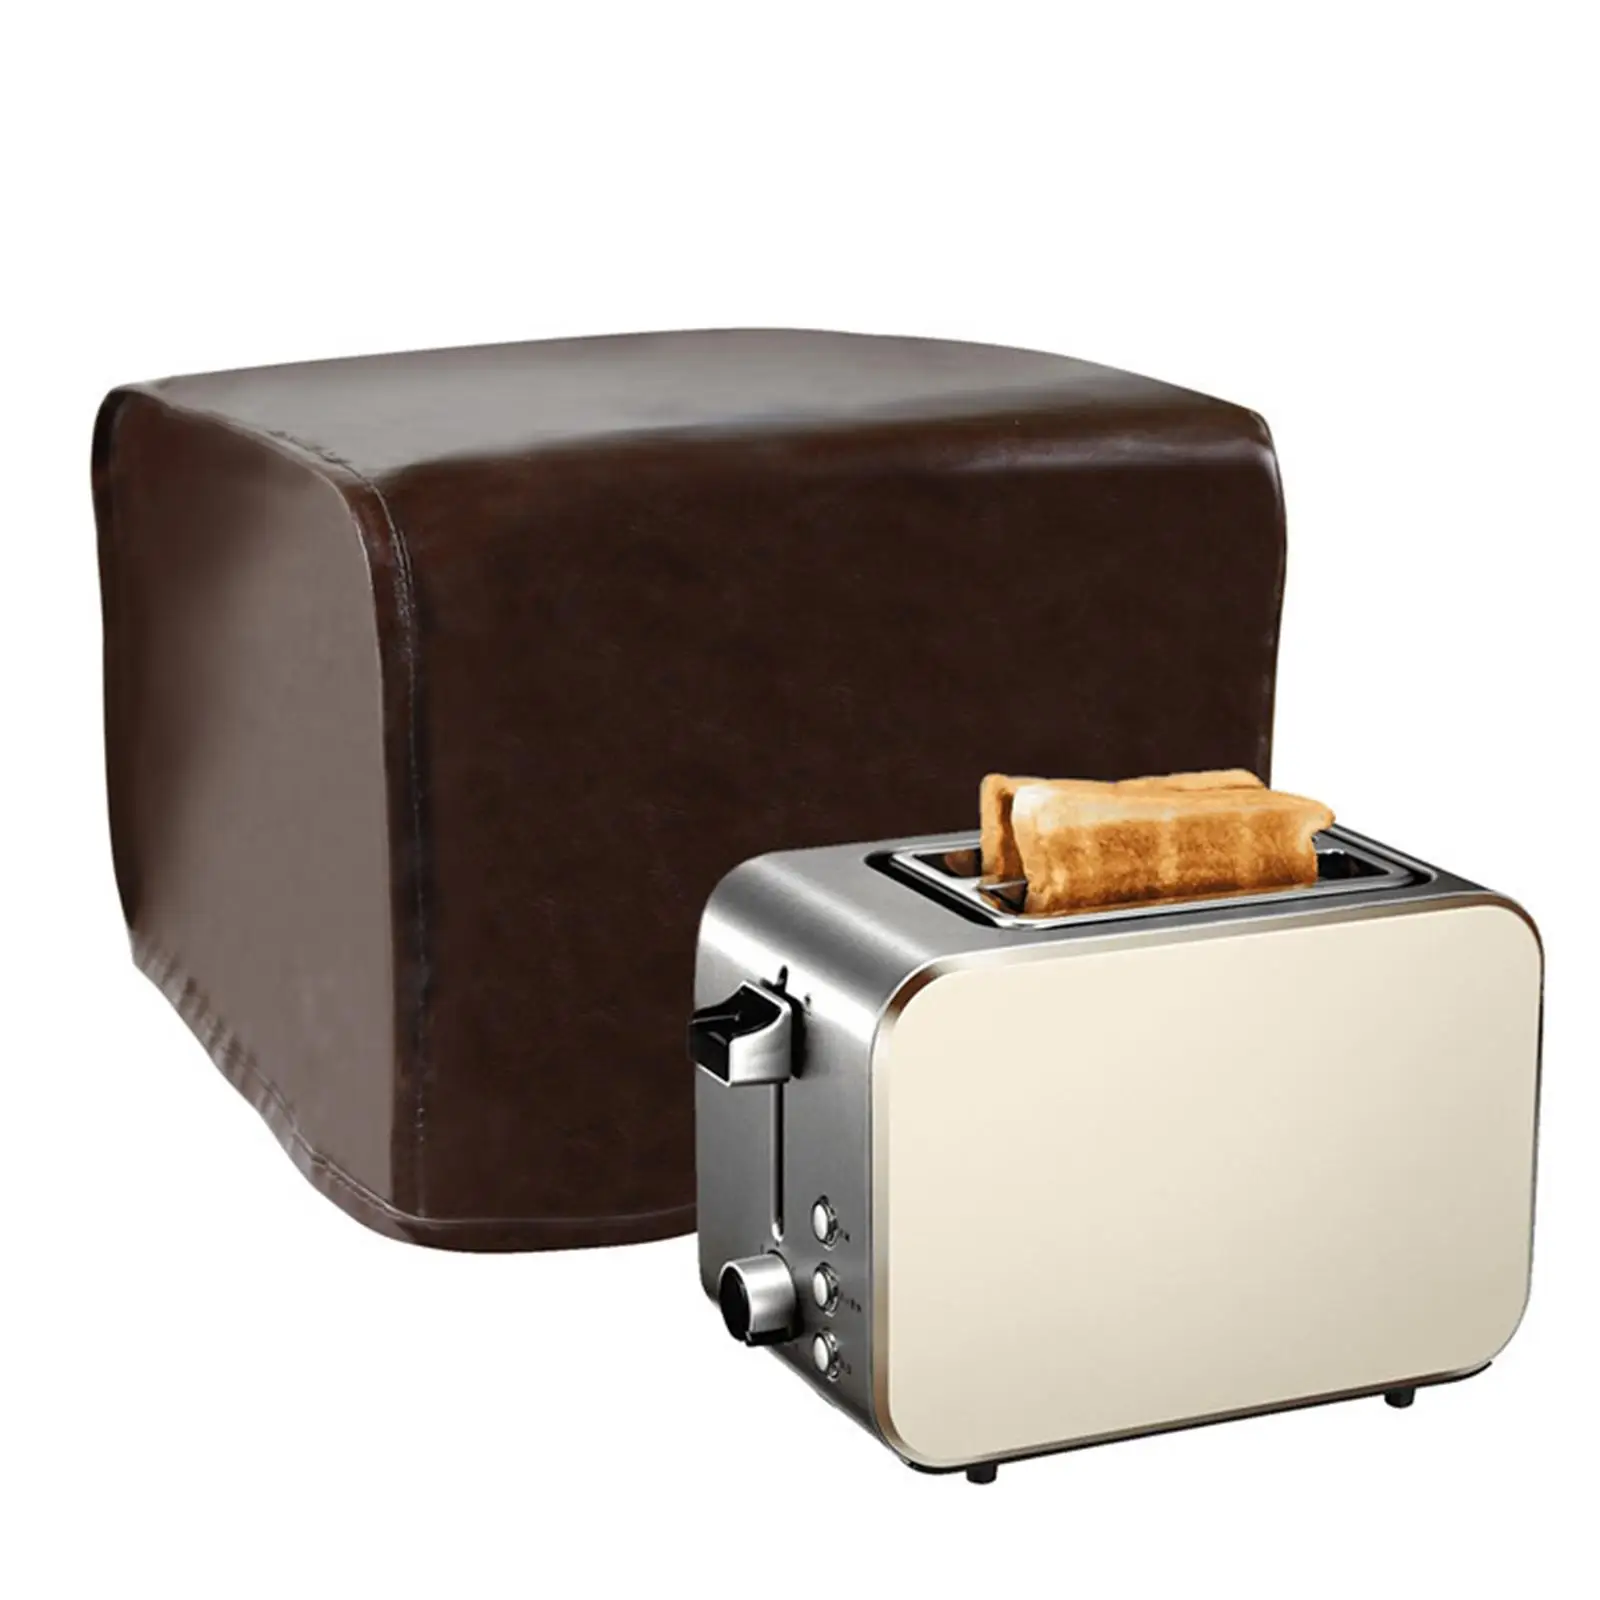 Toaster Cover Accessories Bread Maker Oven Dust Cover for Kitchen Home